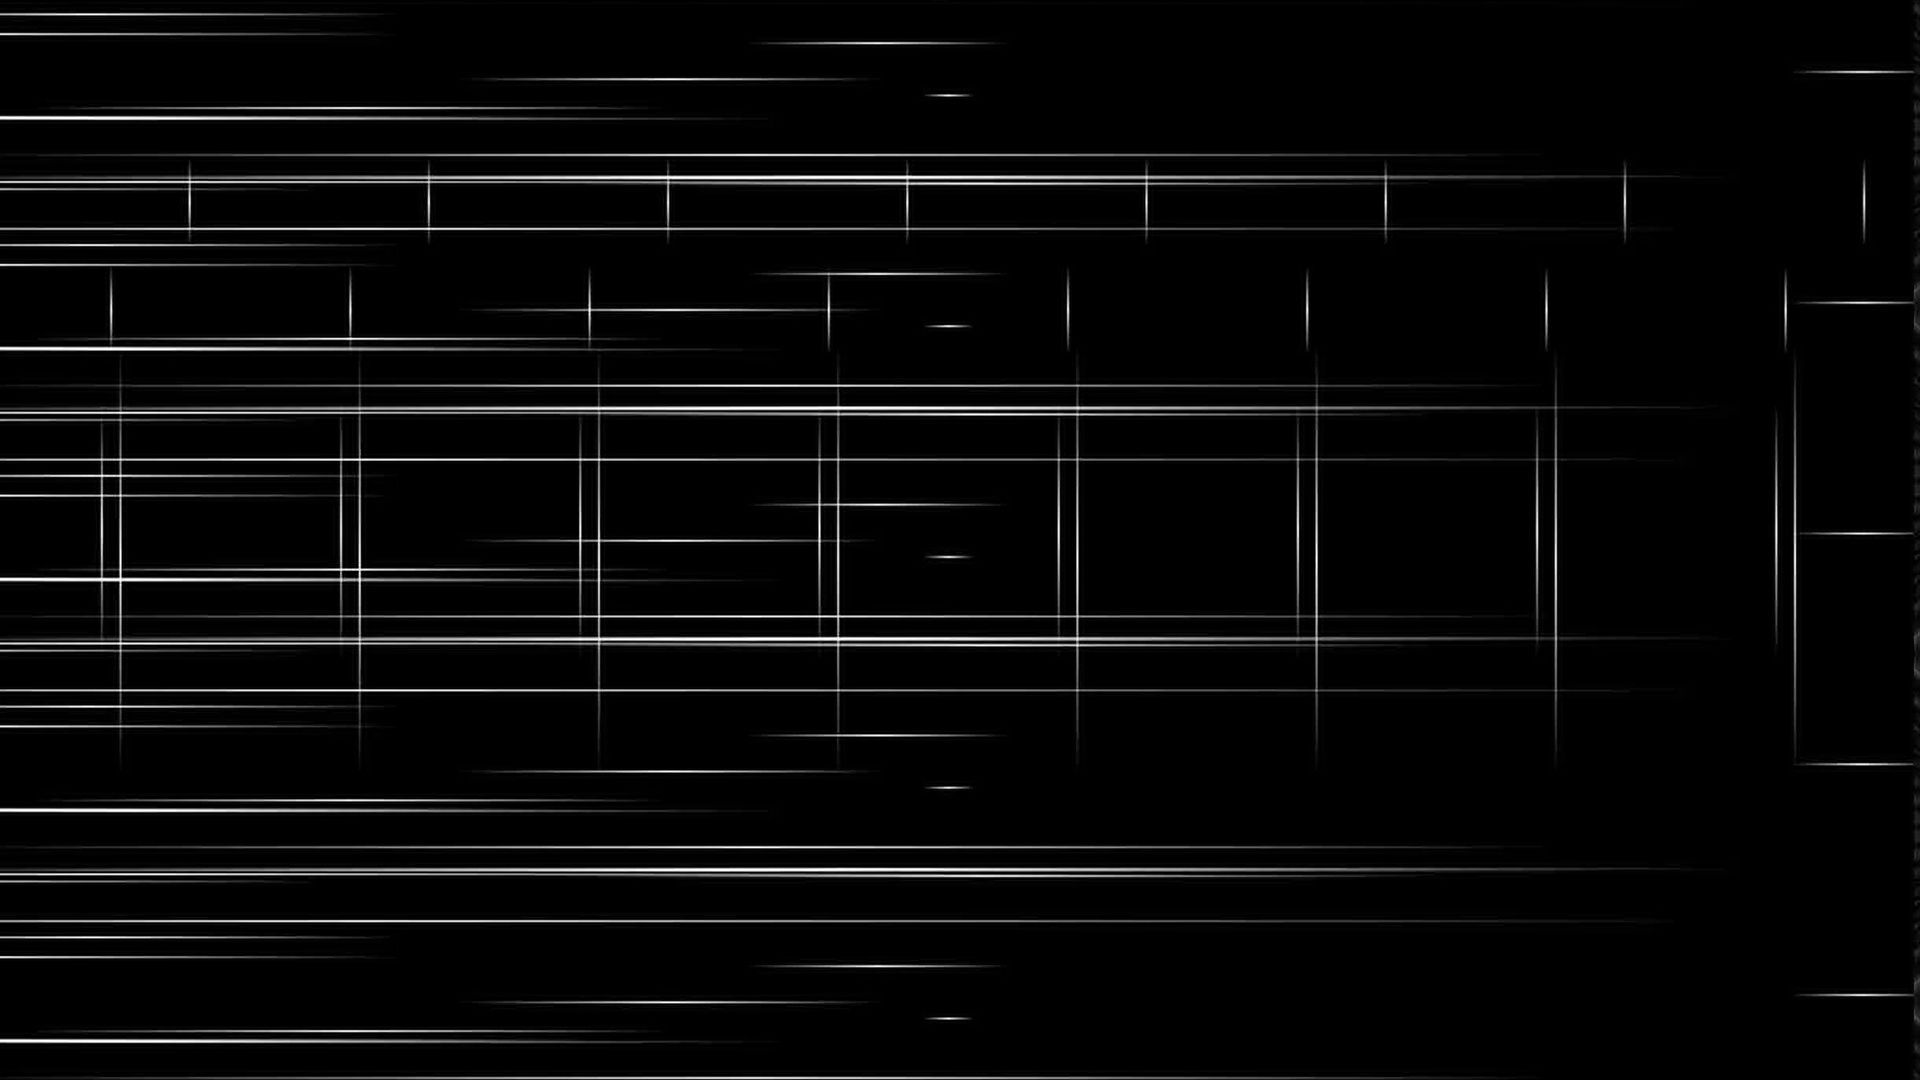 Download wallpaper 1920x1080 black background, stripes, black and white, minimalist full hd, hdtv, fhd, 1080p HD background